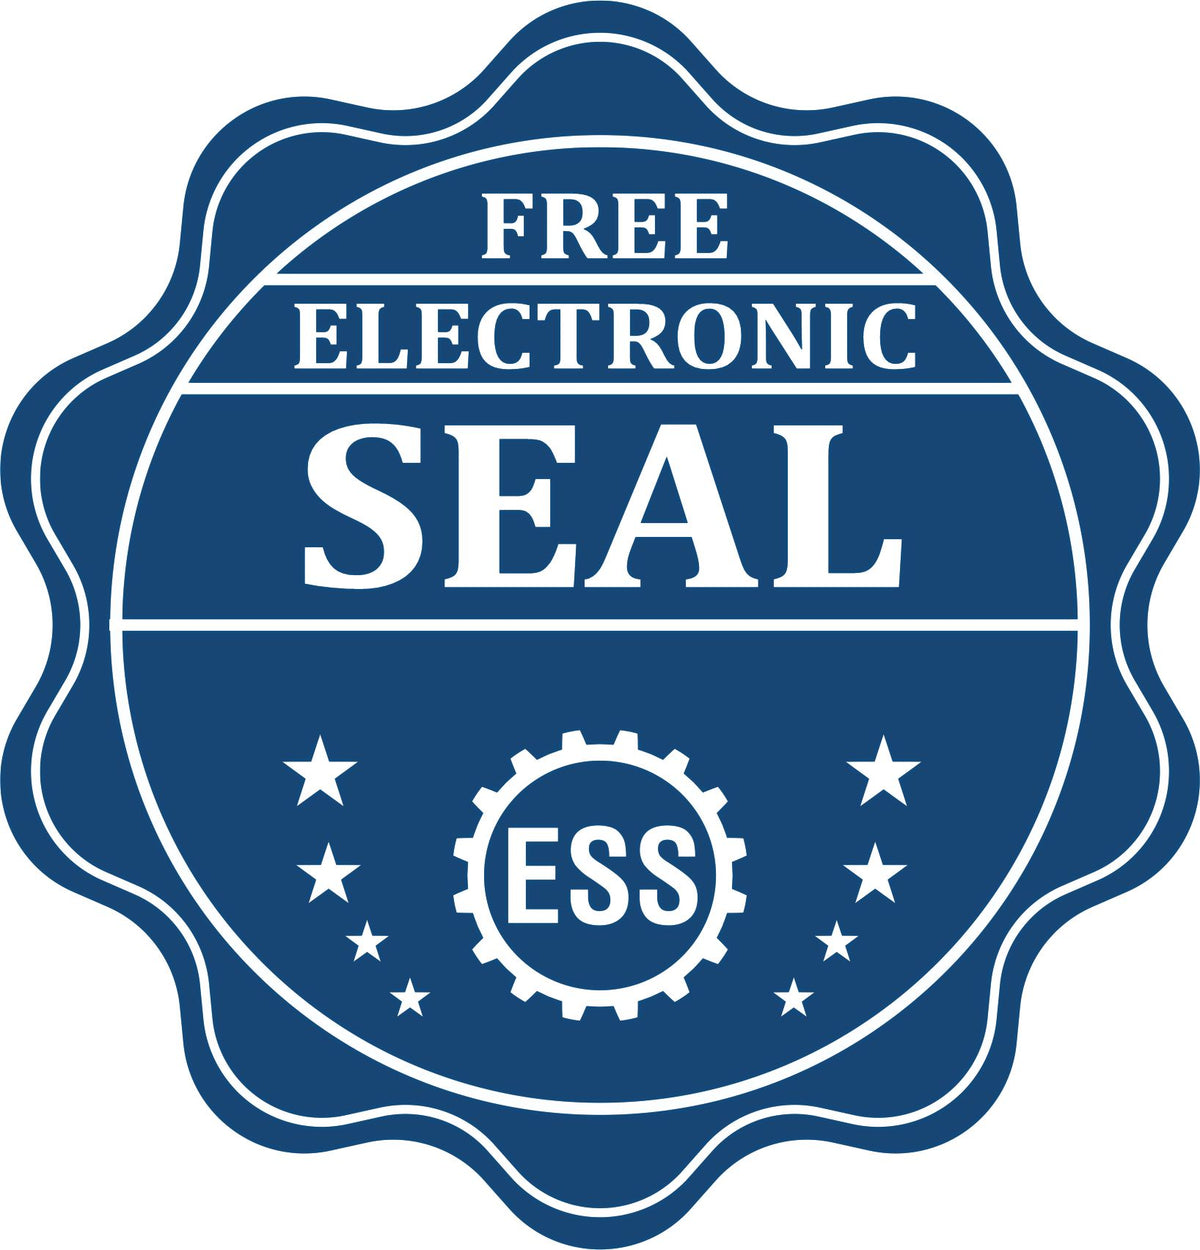 A badge showing a free electronic seal for the Heavy-Duty Pennsylvania Rectangular Notary Stamp with stars and the ESS gear on the emblem.